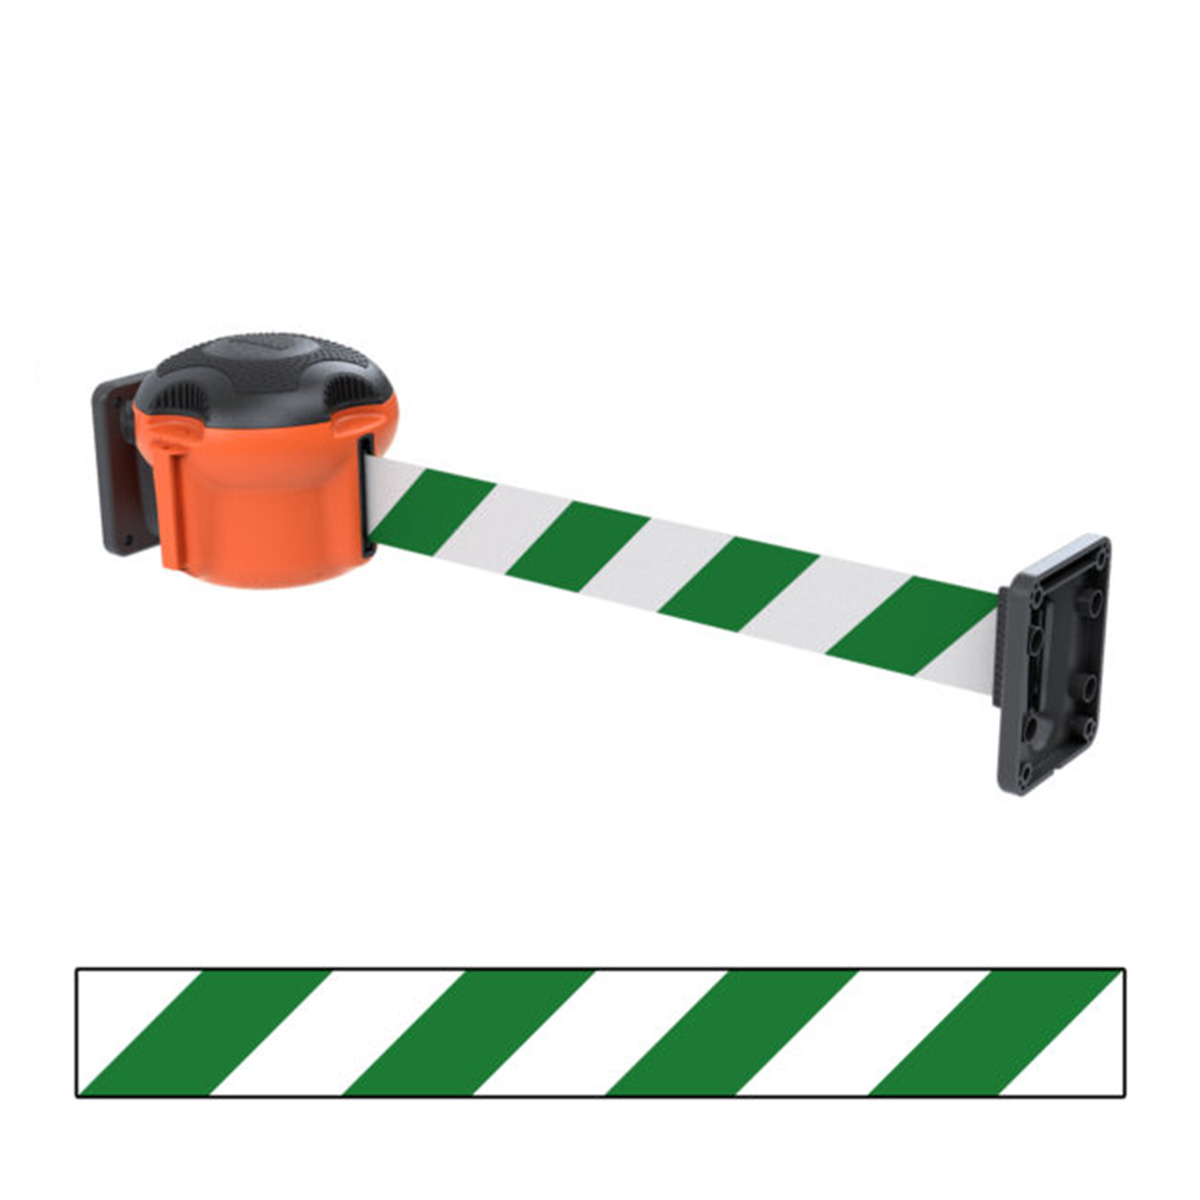 Skipper Wall Mounted Retractable Barrier Kit 9m With Standard Tape End - Green And White Chevron Tape 